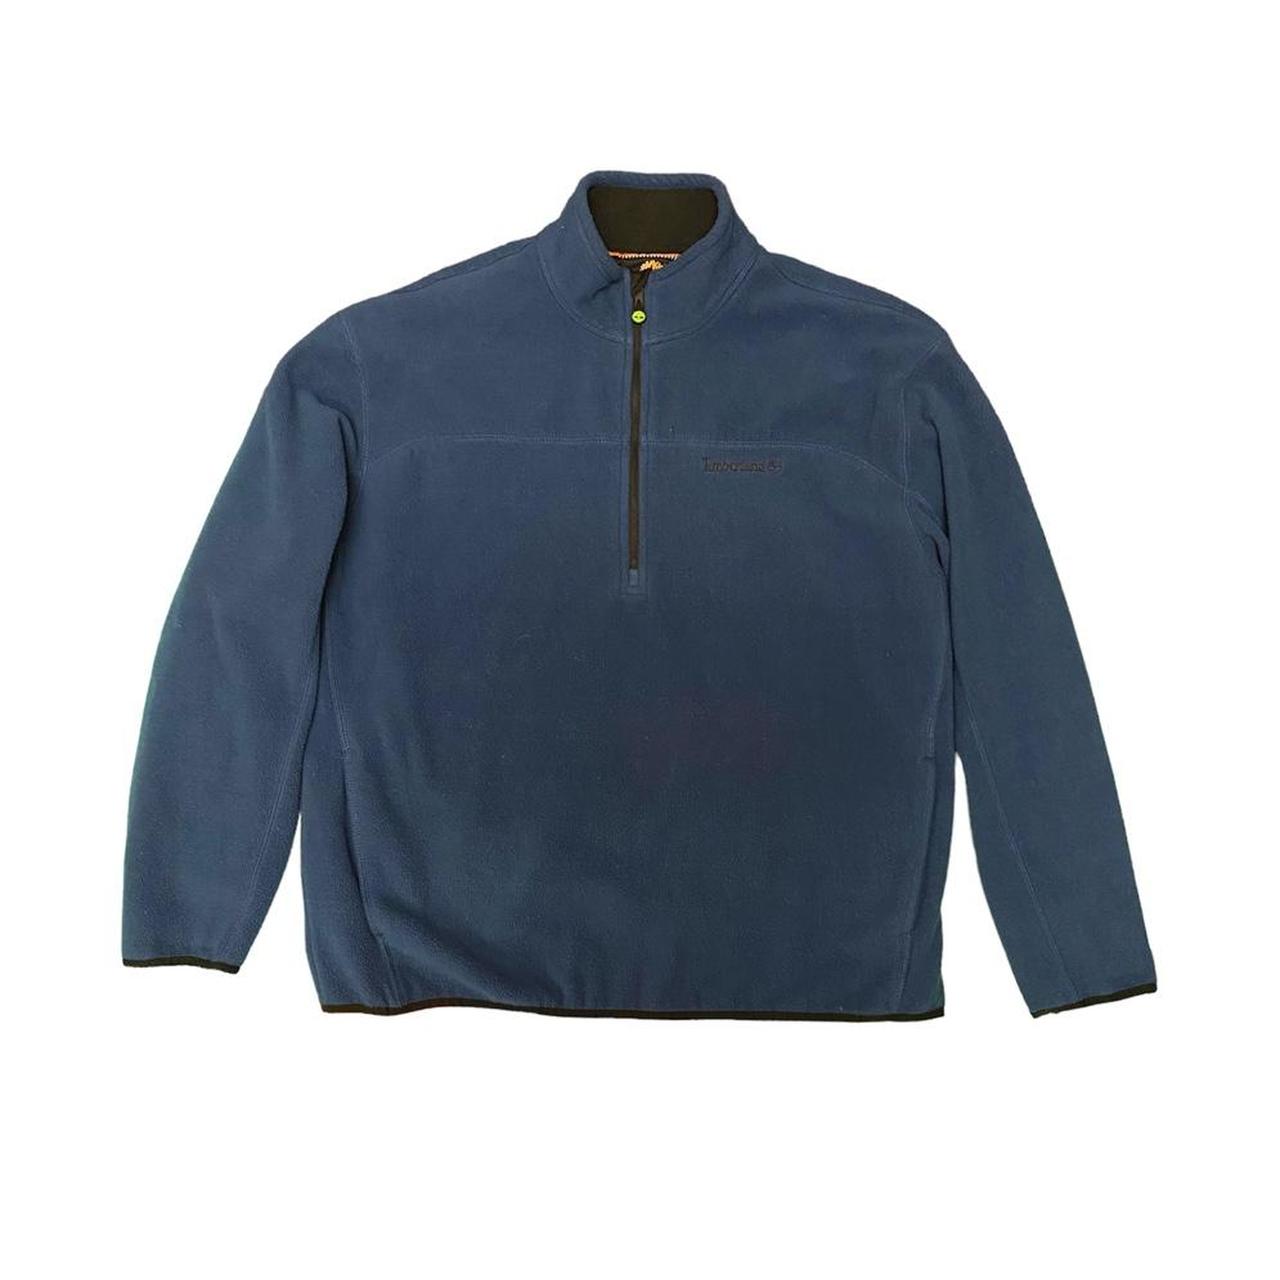 Timberland Men's Blue and Navy Jumper